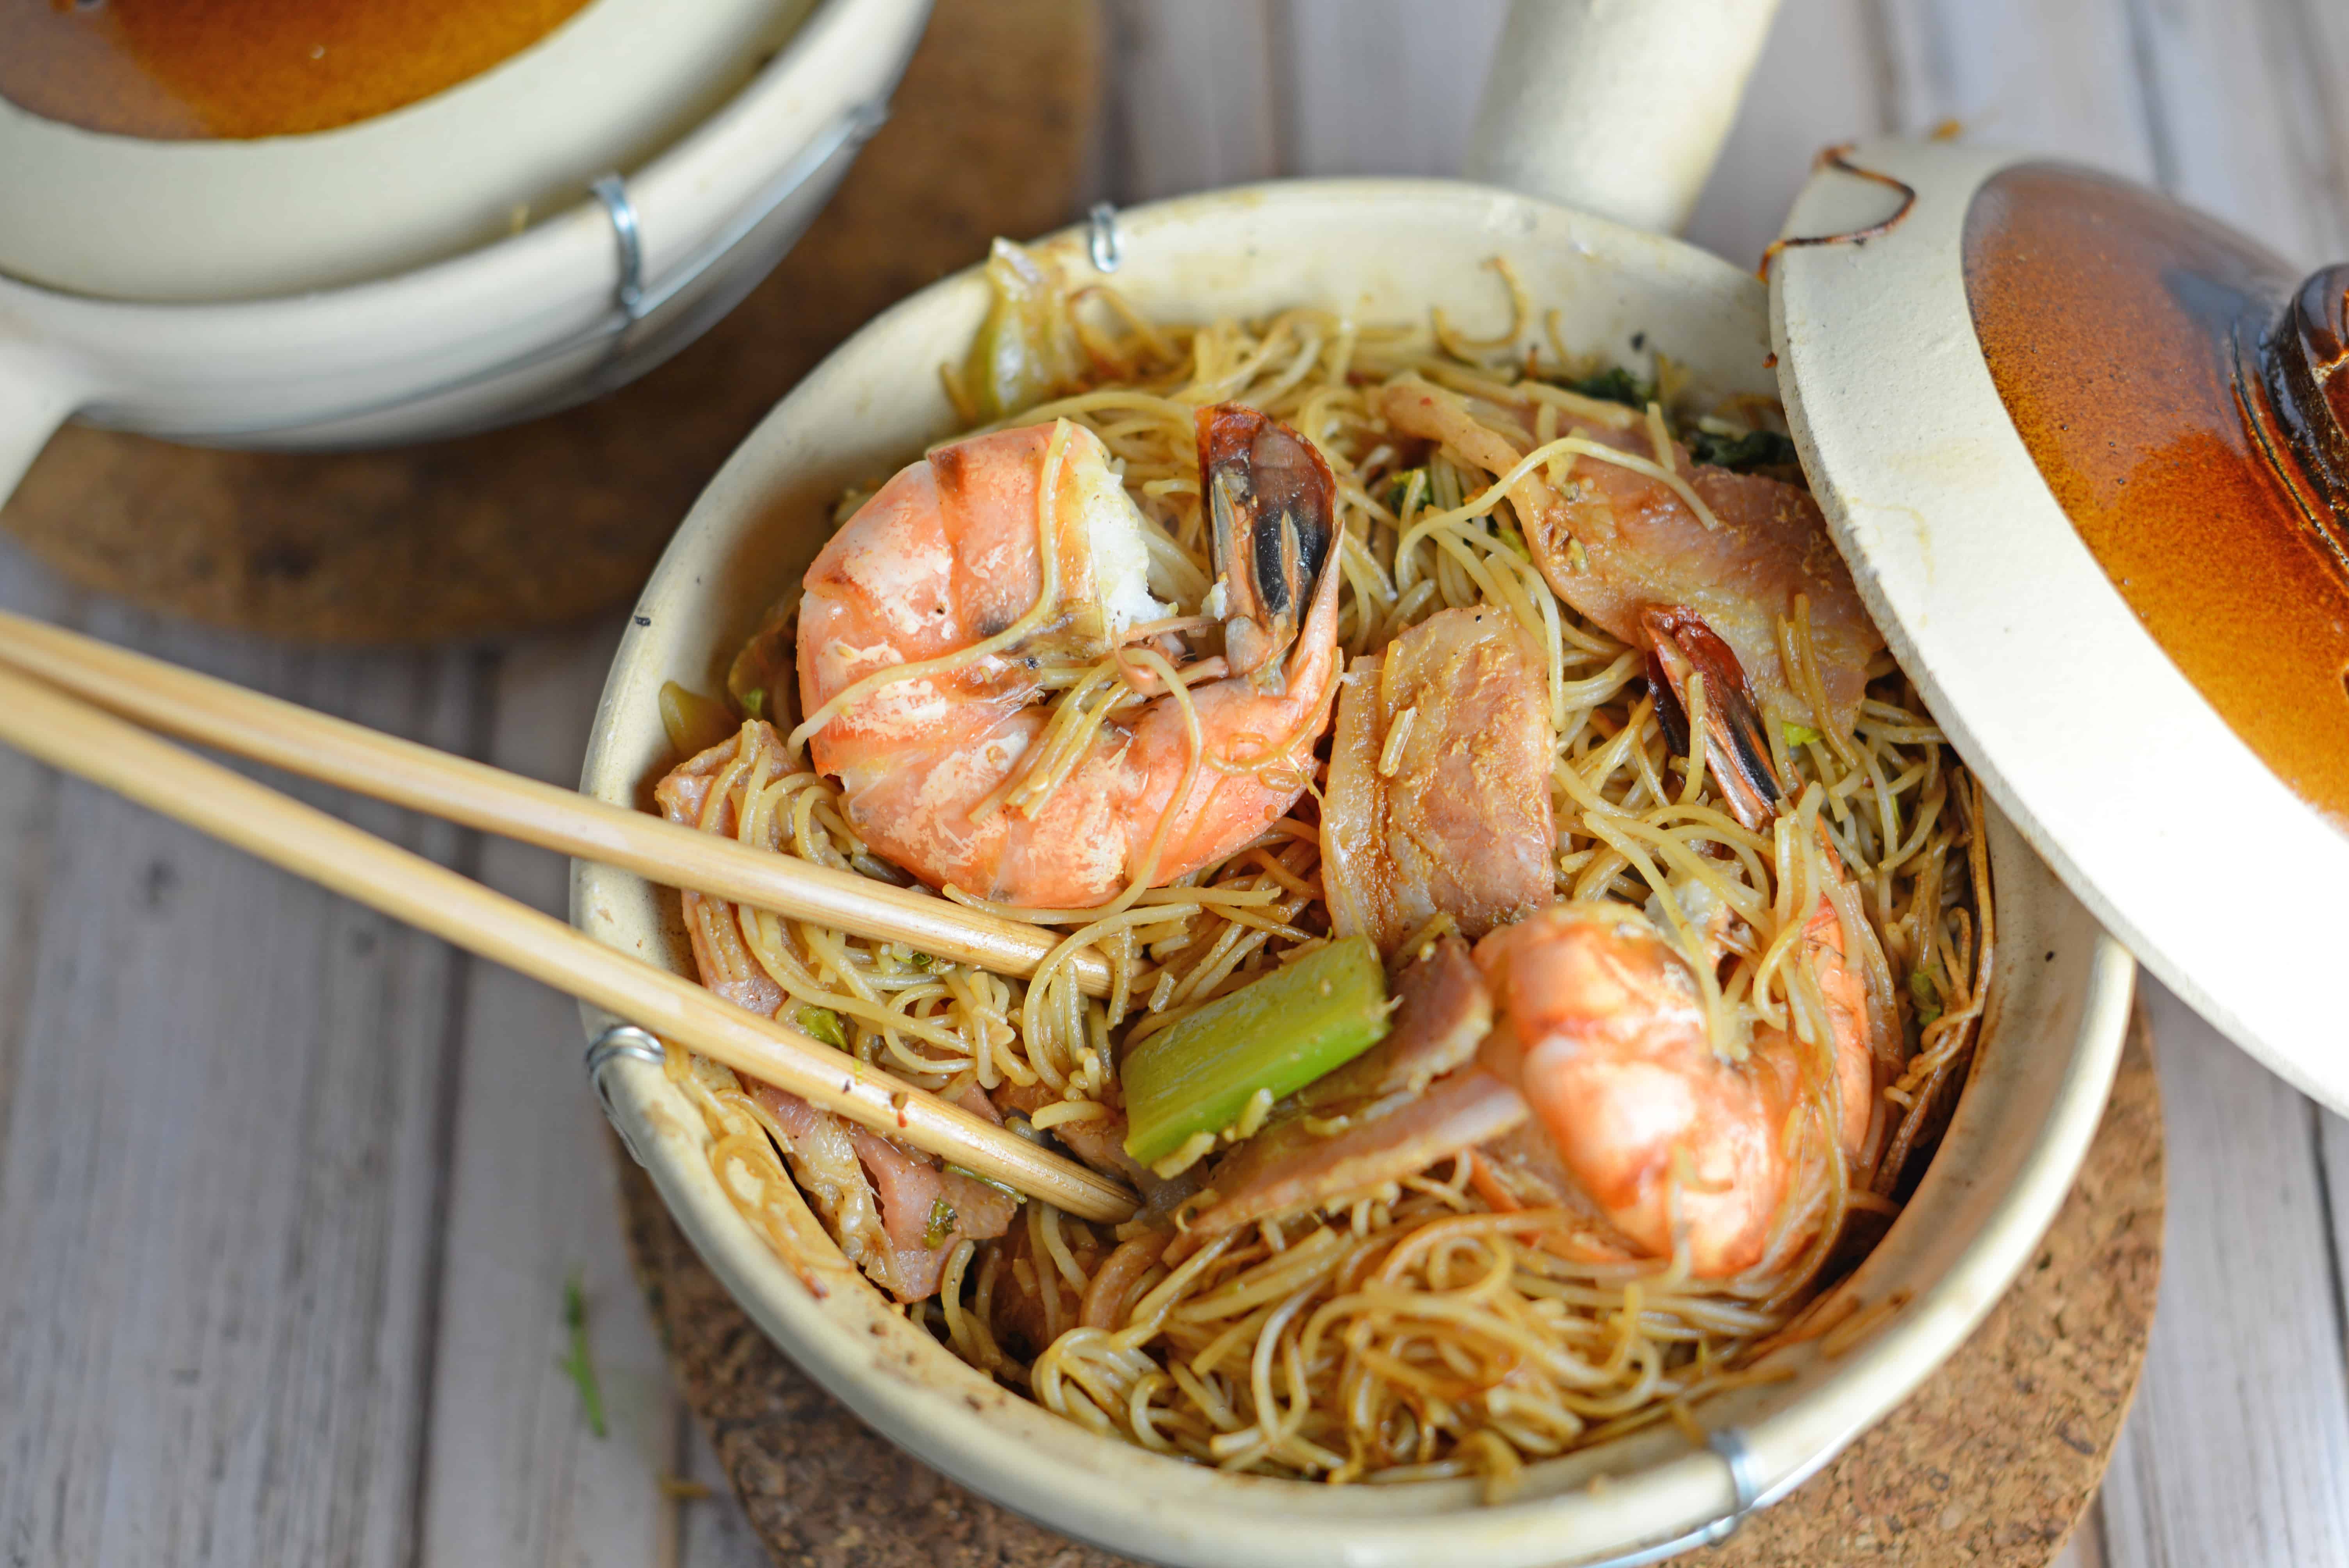 Thai Shrimp with Glass Noodles- one pot Thai dish cooked in a clay pot, cast iron or a Dutch oven. Shrimp steam between a layer of bacon and aromatics and glass noodles tossed in spy sauce. Topped with a zesty Thai sauce and fresh greens. Also known as Kung Op Wun Sen.